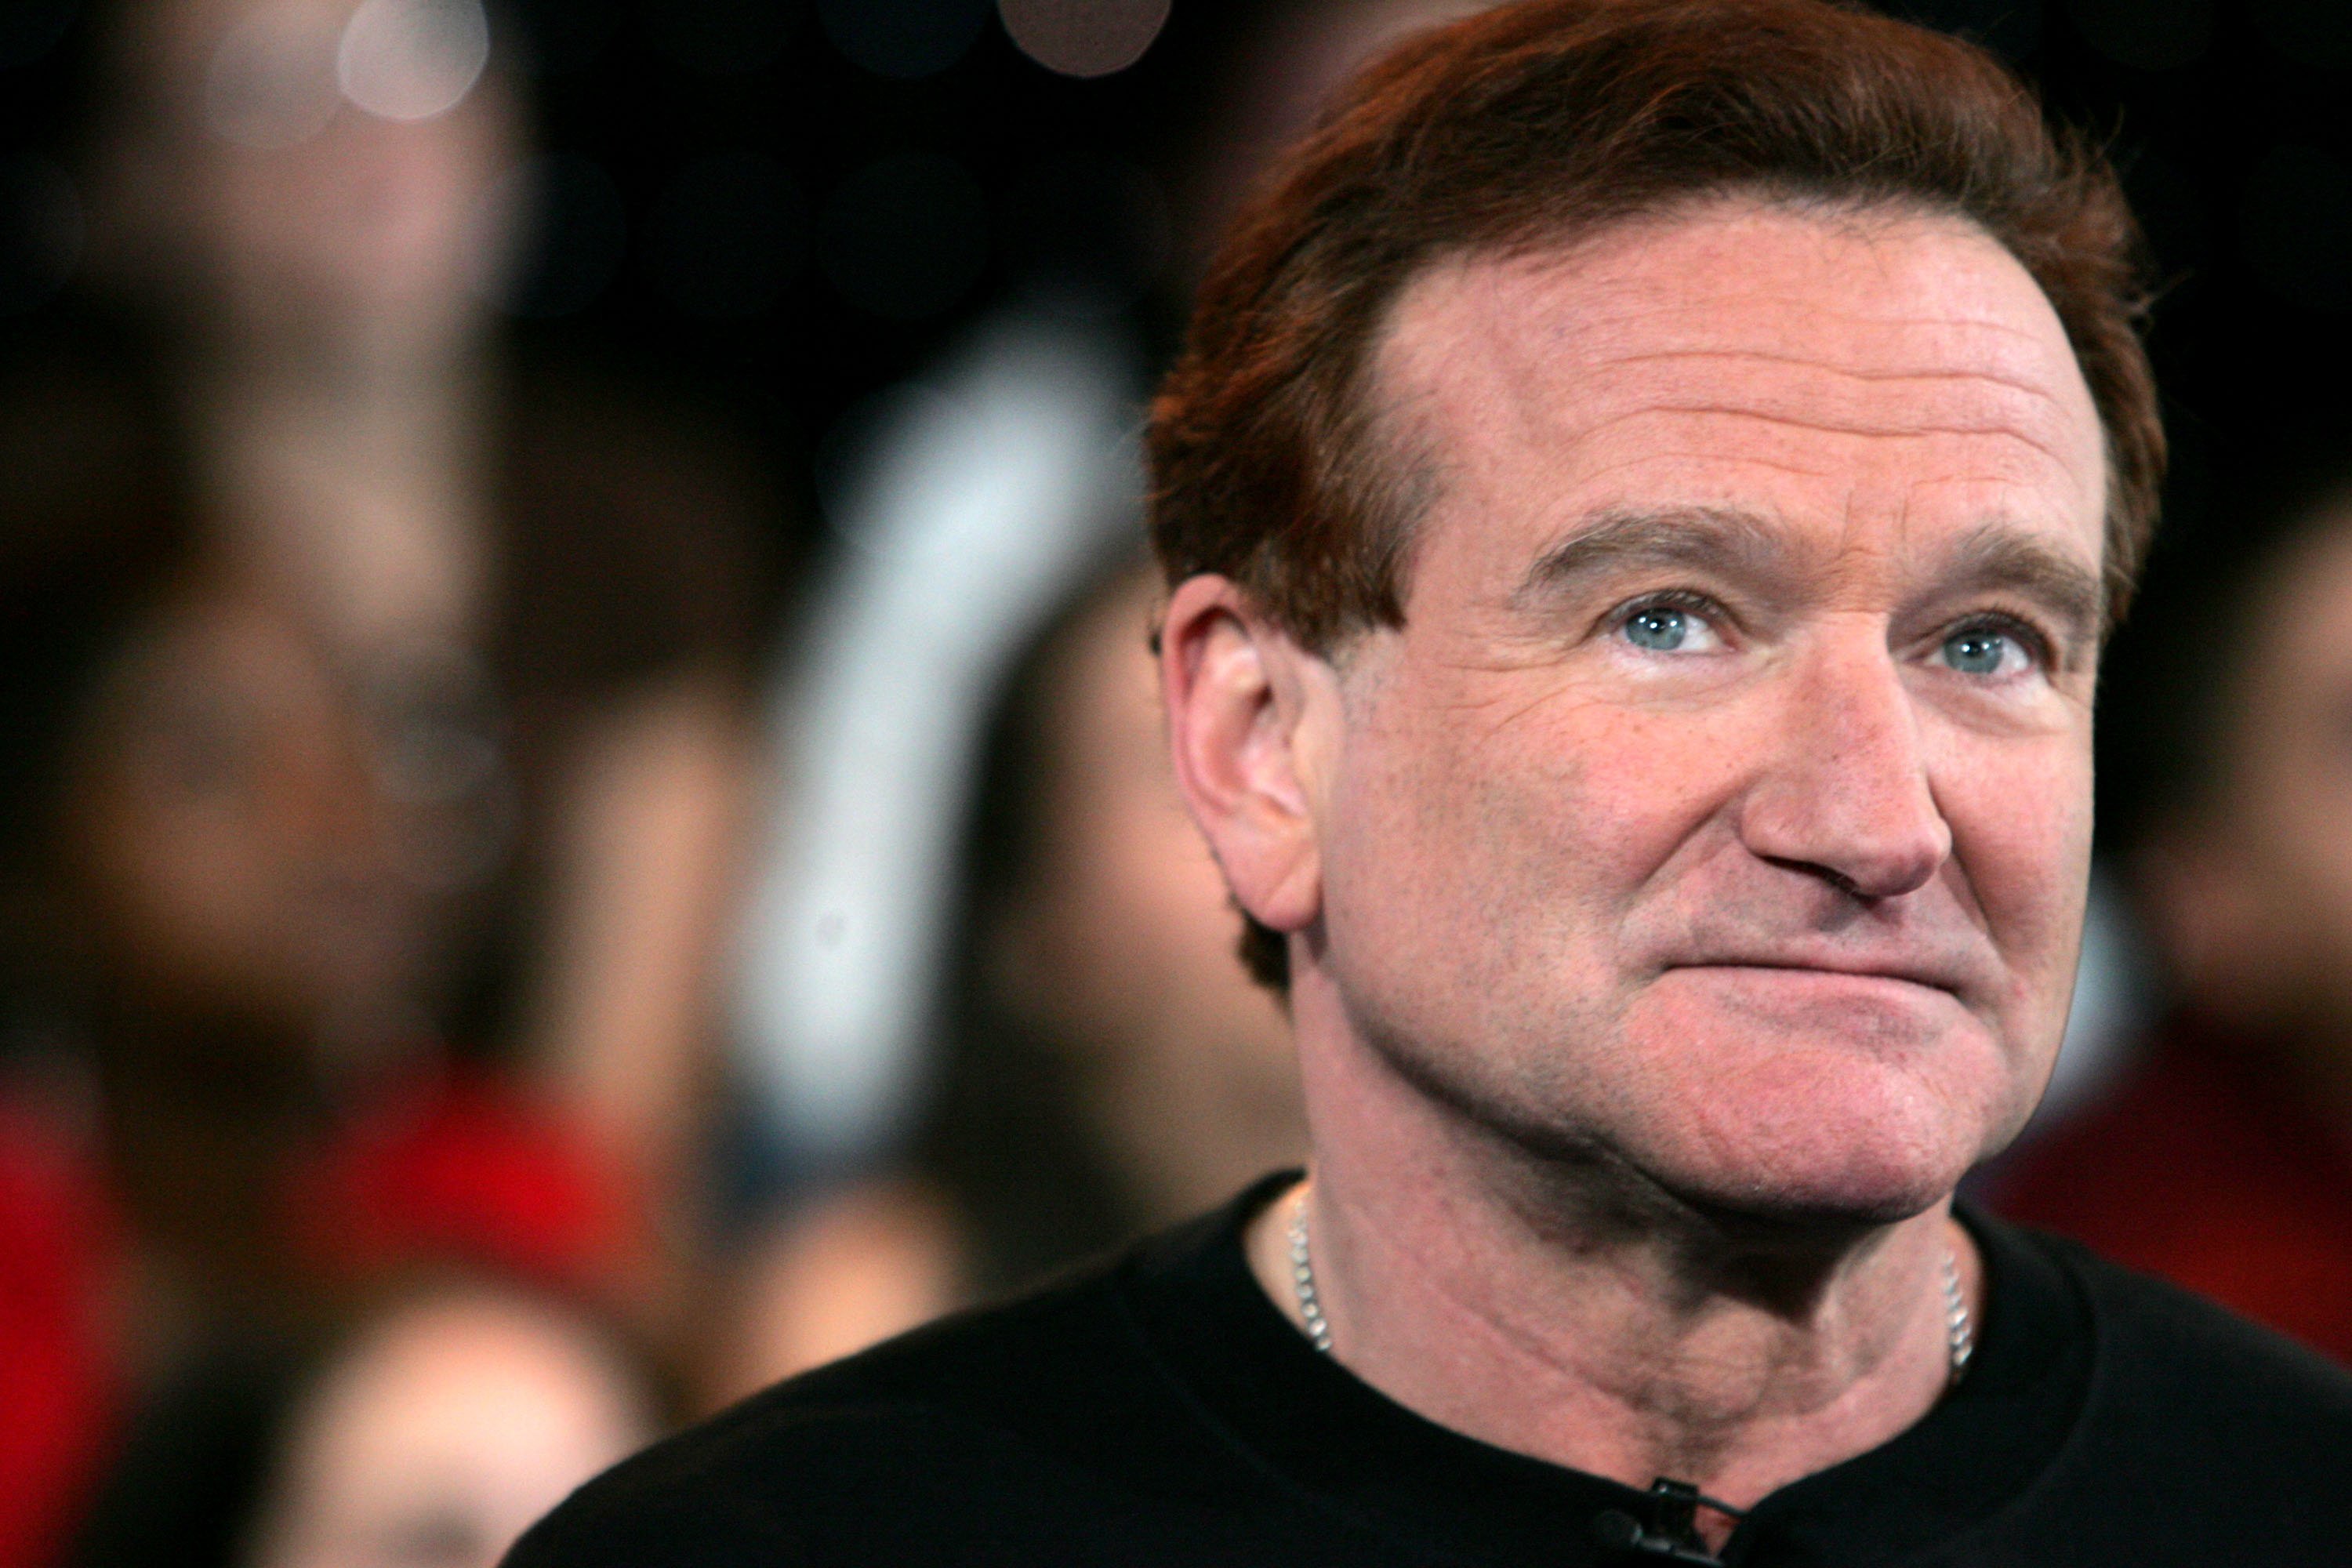 Actor Robin Williams appears onstage during MTV's Total Request Live at the MTV Times Square Studios on April 27, 2006 in New York City | Source: Getty Images